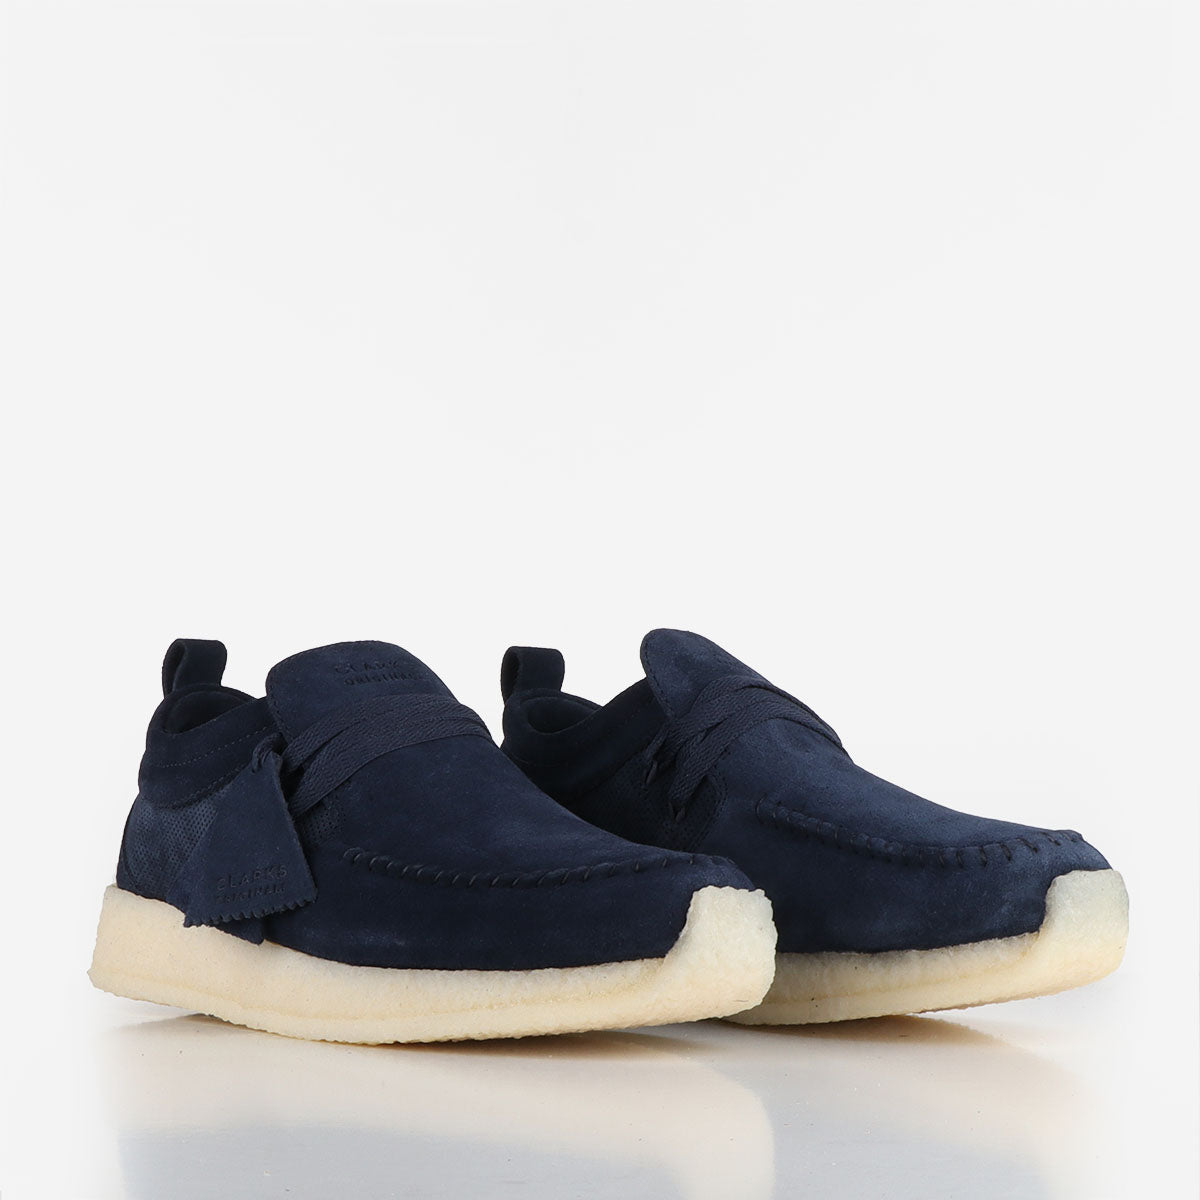 Clarks Originals 8th Street By Ronnie Fieg Maycliffe Shoes